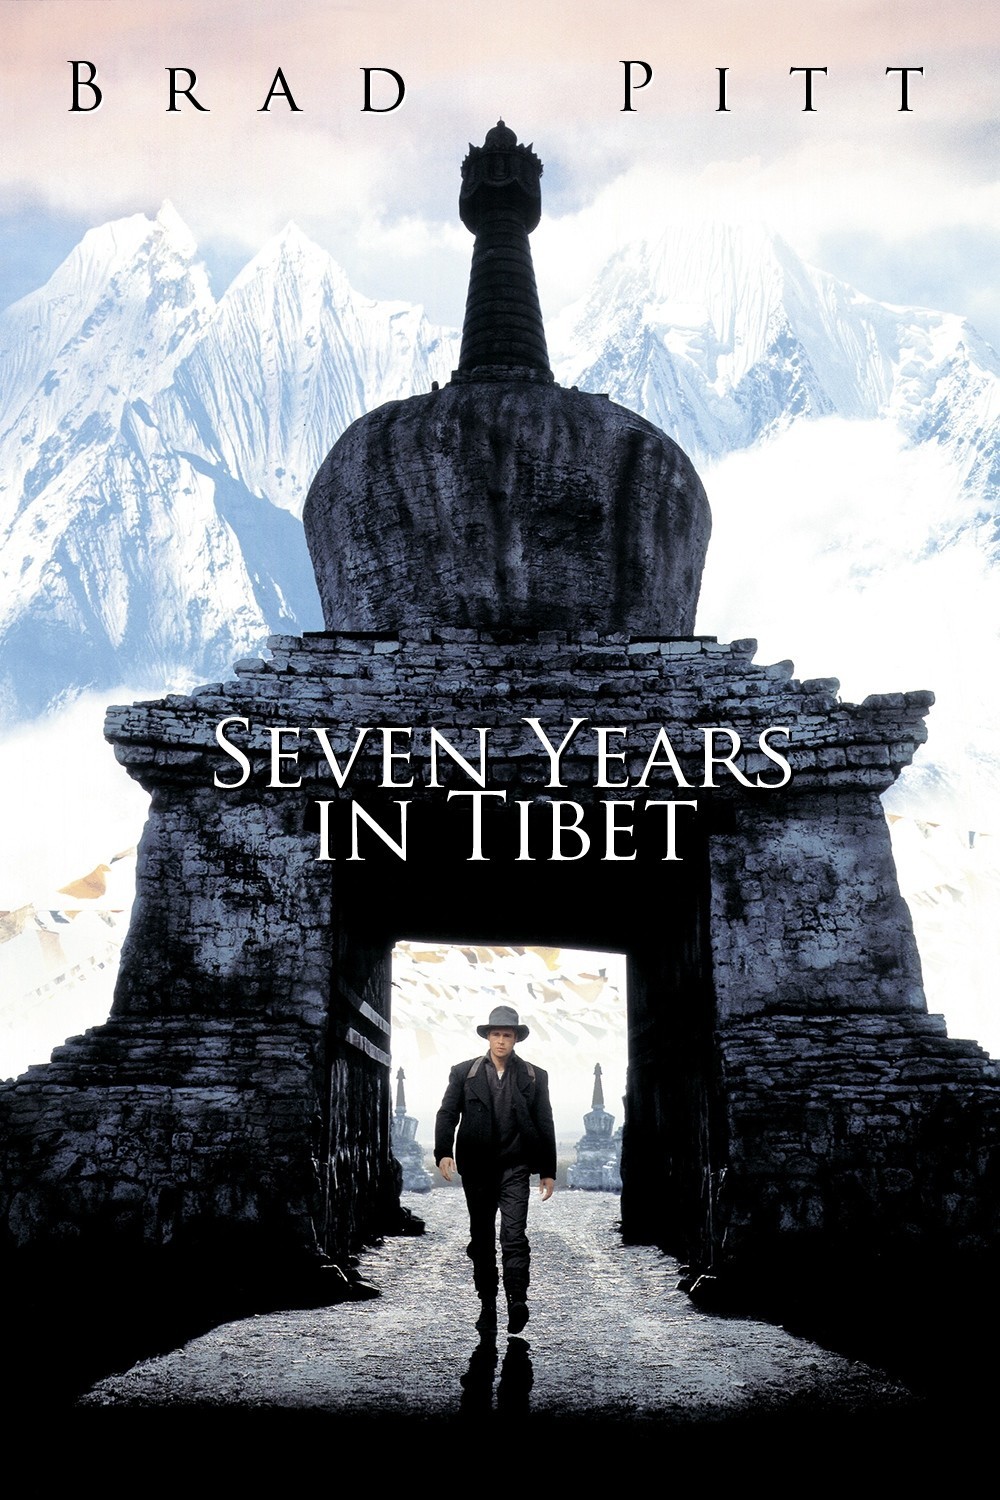 Poster for the movie "Seven Years in Tibet"